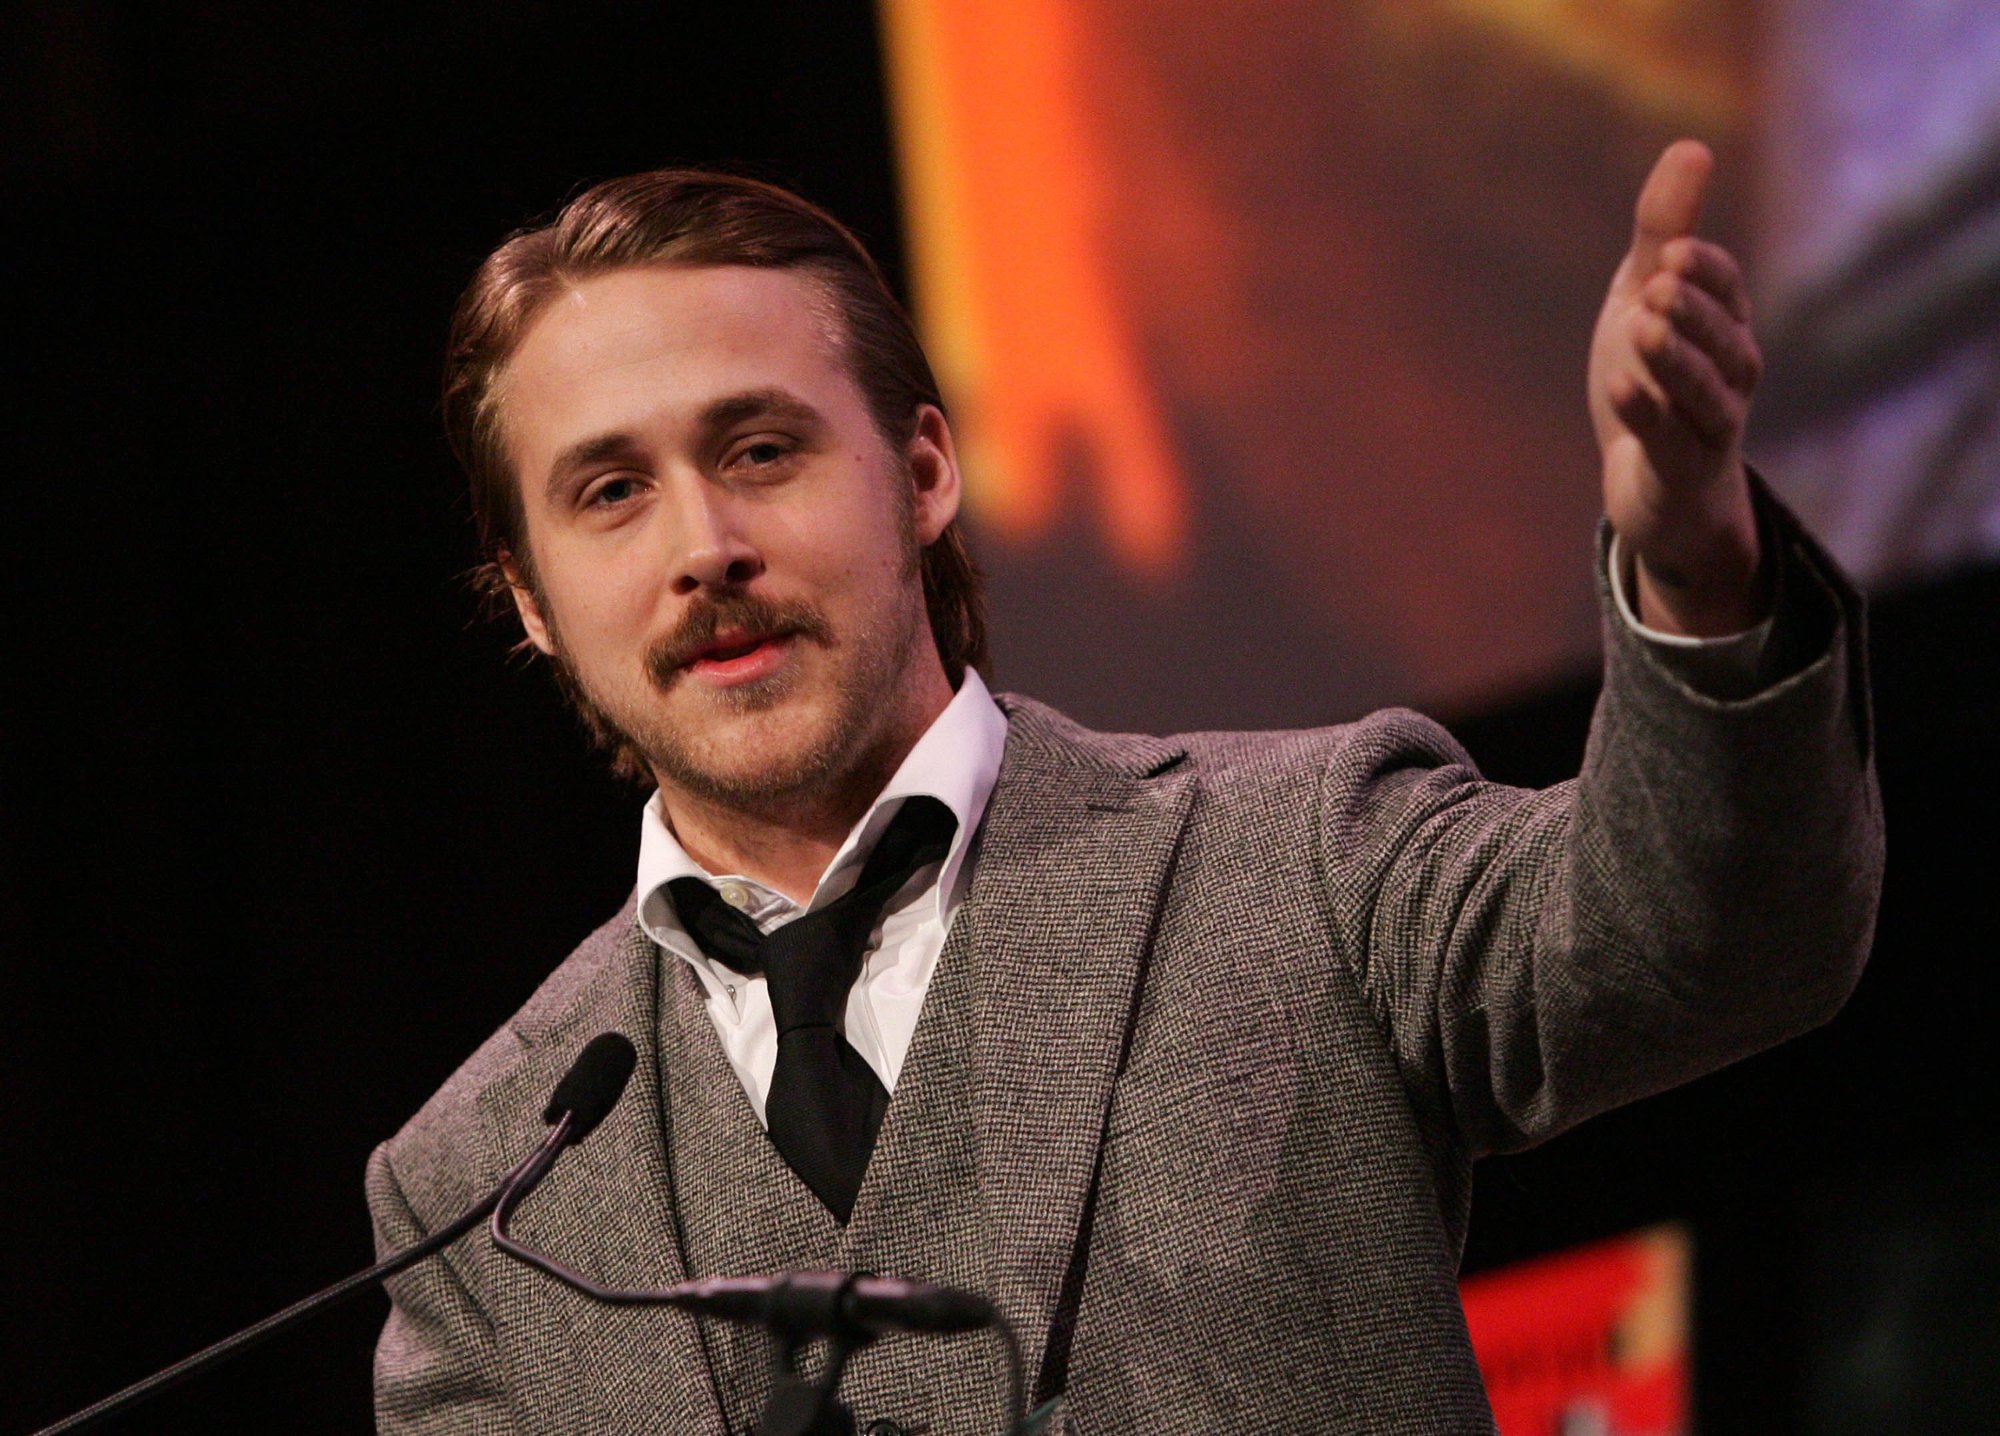 'Stay' movie star Ryan Gosling wearing a tan suit and tie, holding his hand up and talking into a microphone